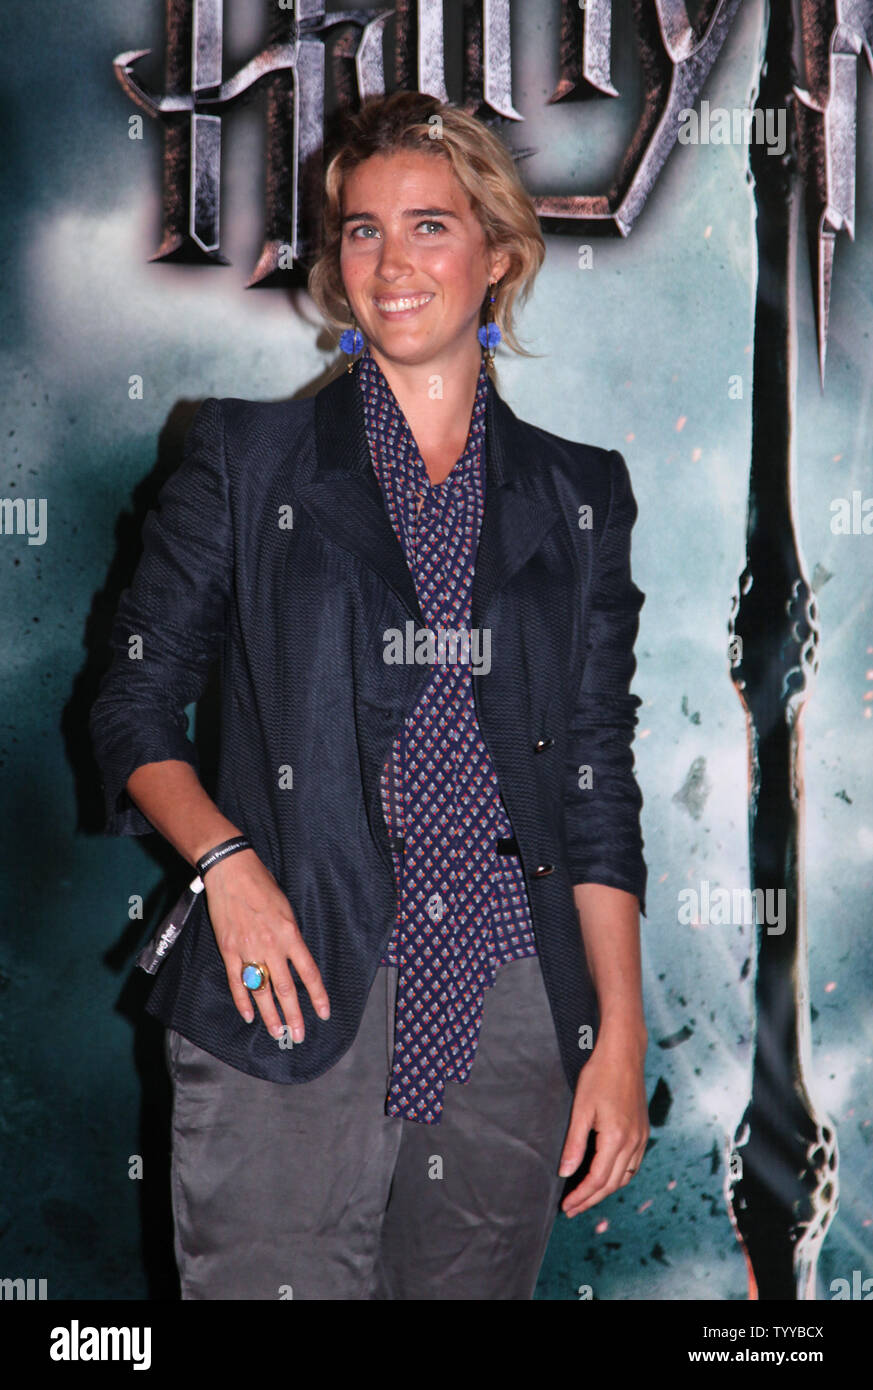 Vahina Giocante arrives at the French premiere of the film 'Harry Potter and the Deathly Hallows: Part 2' in Paris on July 12, 2011.     UPI/David Silpa Stock Photo